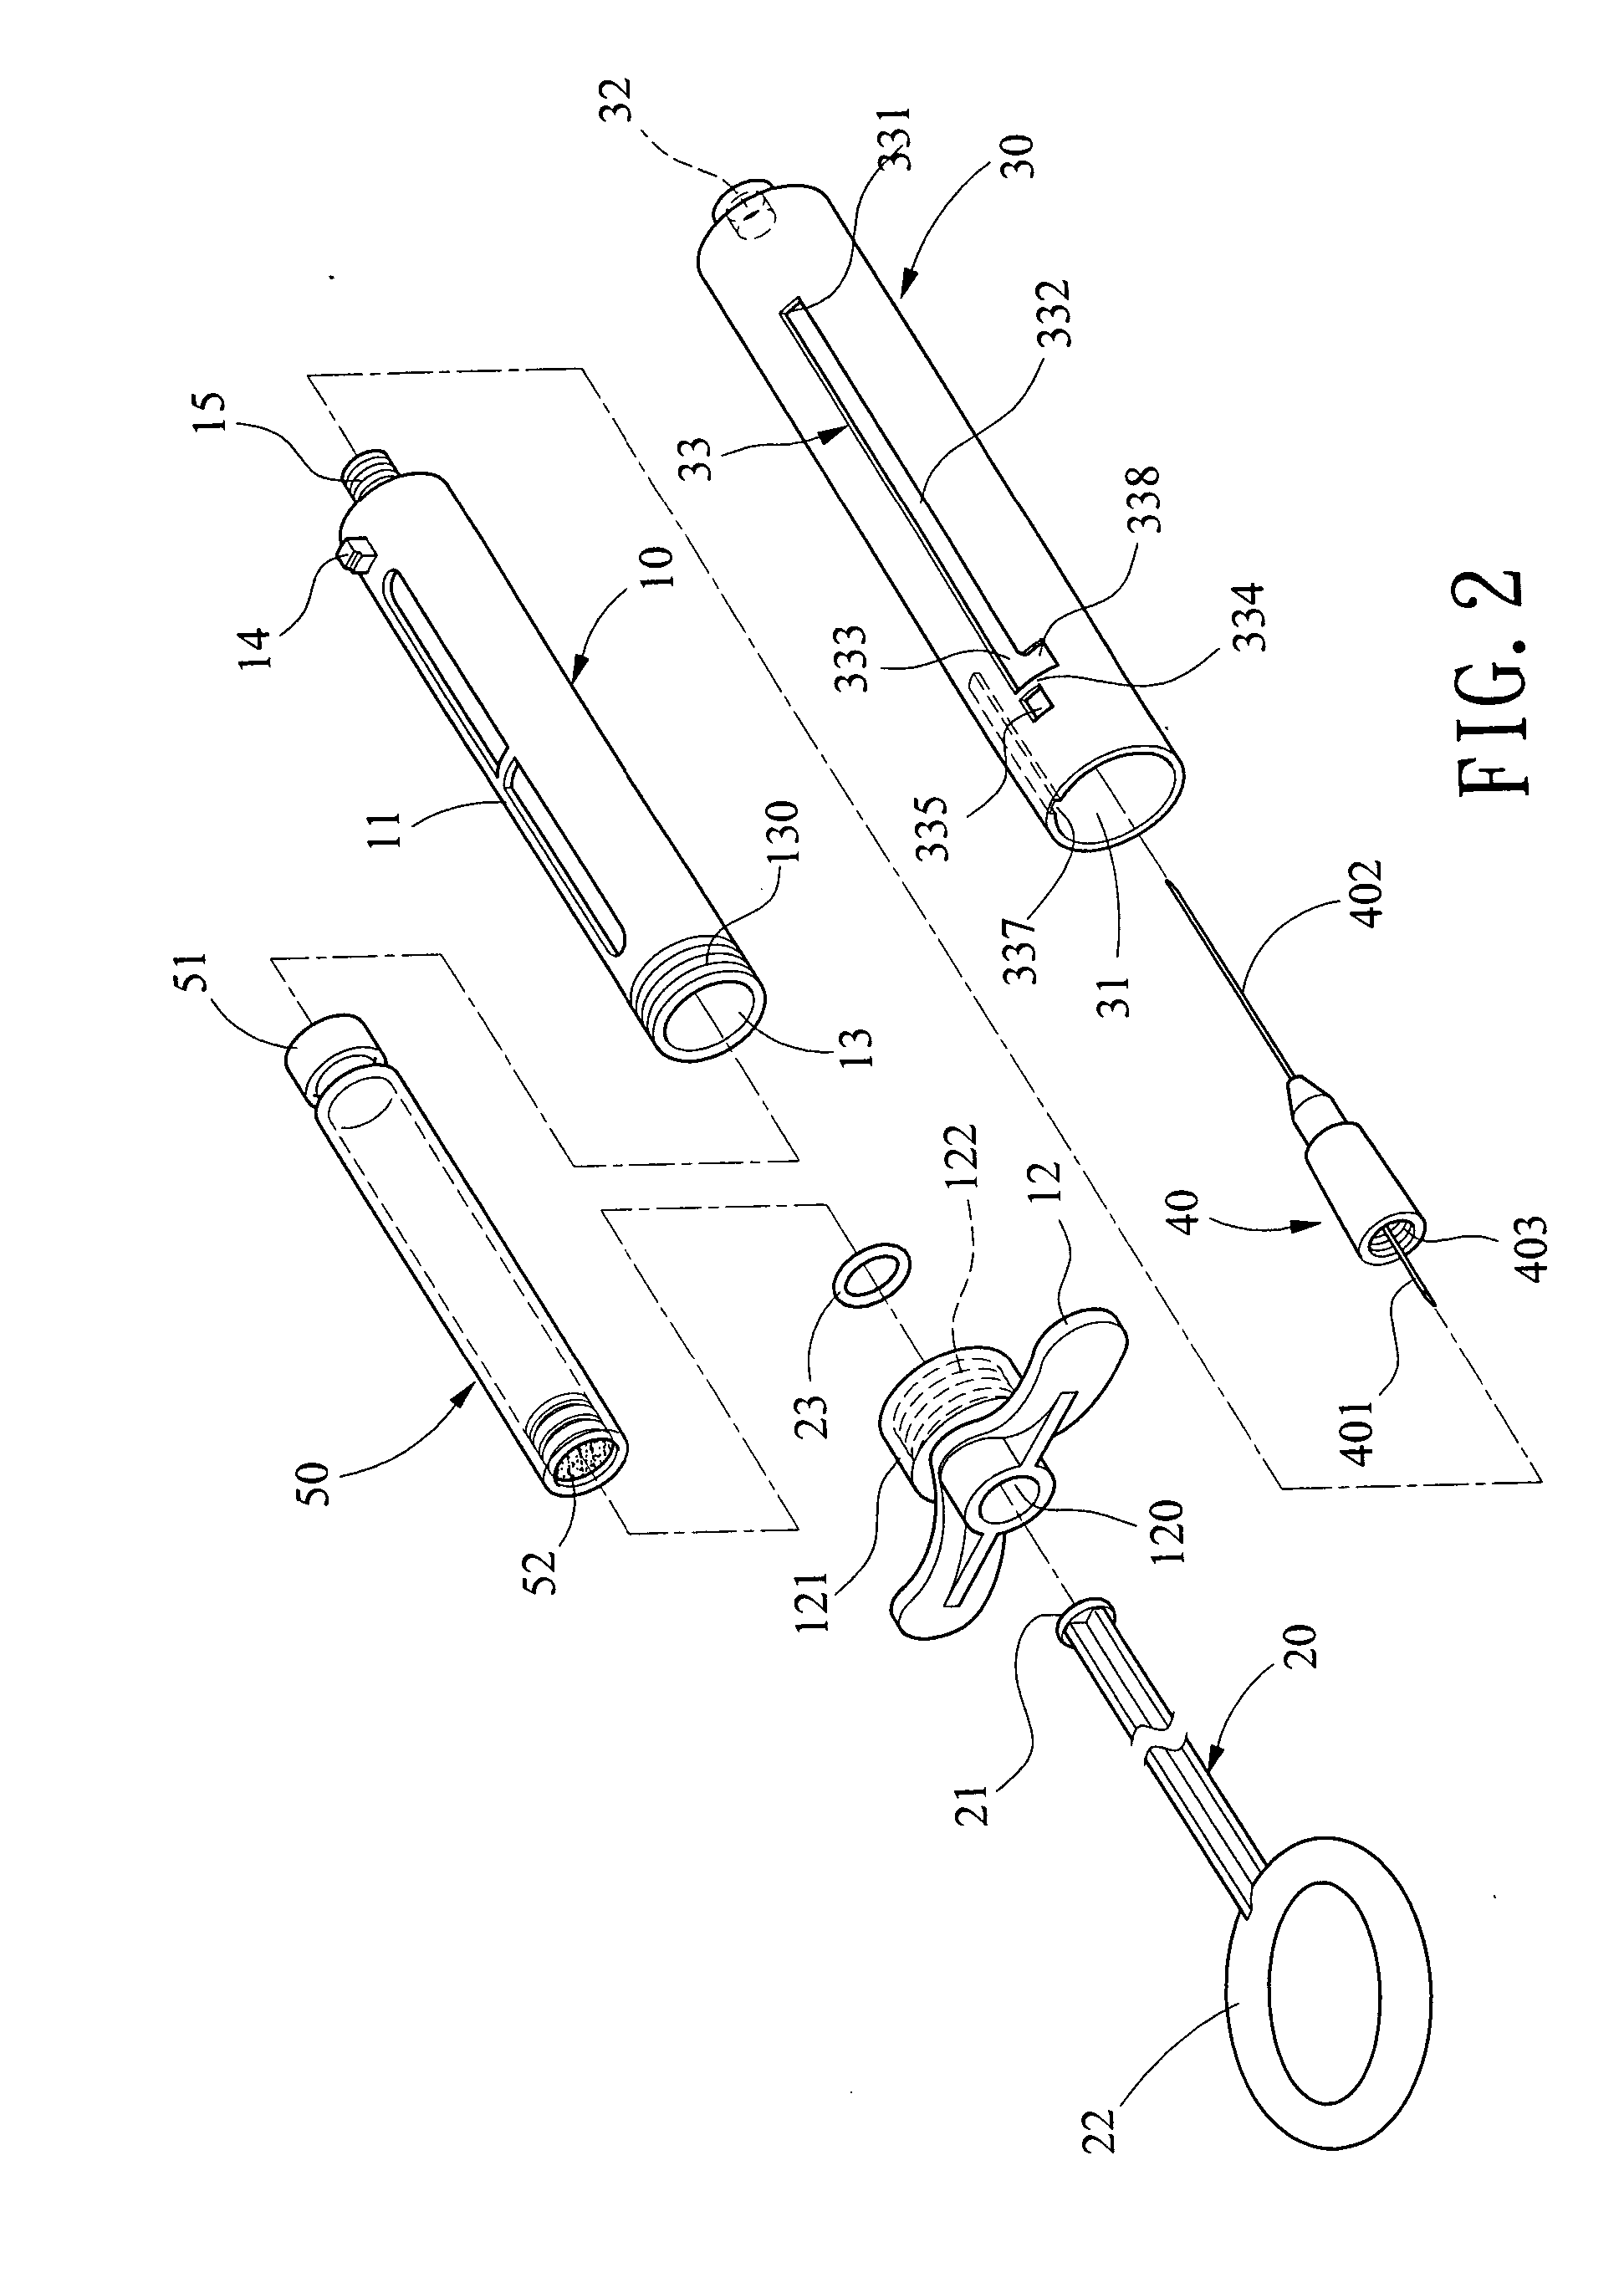 Disposable safety syringe for dispensing anesthetic